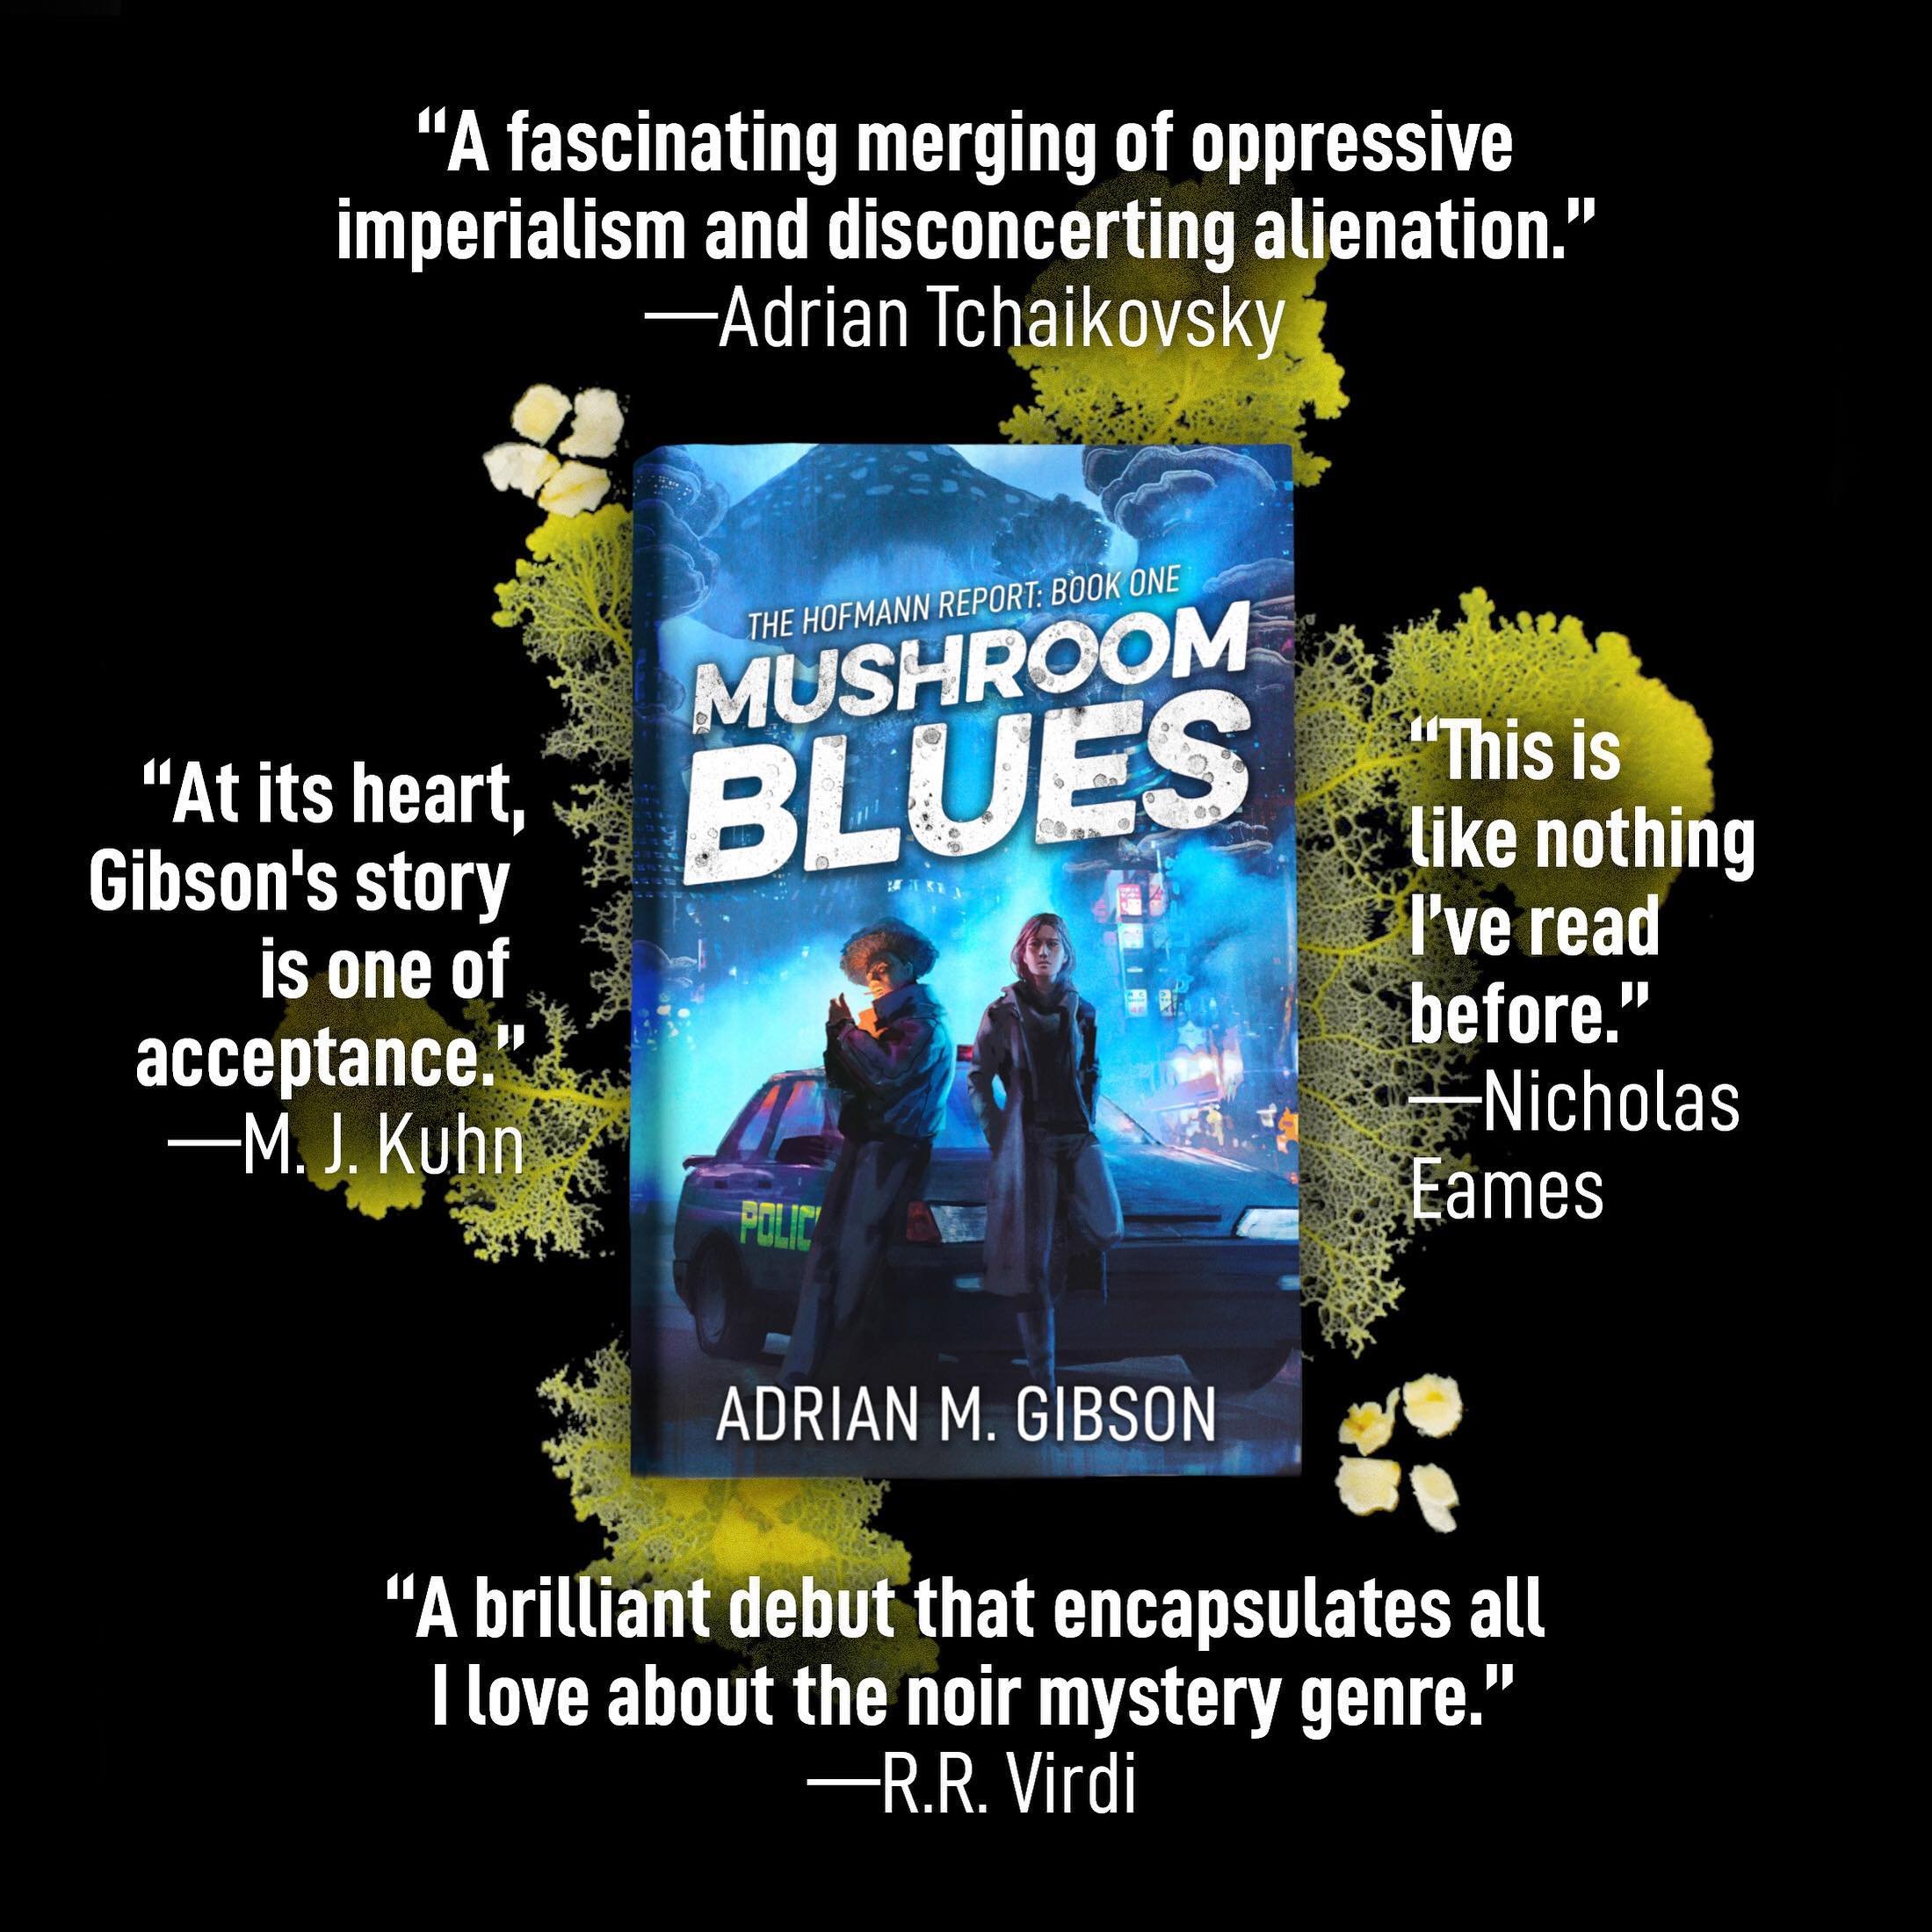 I&rsquo;m so honored to have gotten such stellar blurbs for my debut #MushroomBlues, from authors whom I deeply respect. Thank you again to aptshadow (Adrian Tchaikovsky) @thebookofeames @mjkuhnbooks and @rrvirdi 🍄

BUY MUSHROOM BLUES TODAY in paper